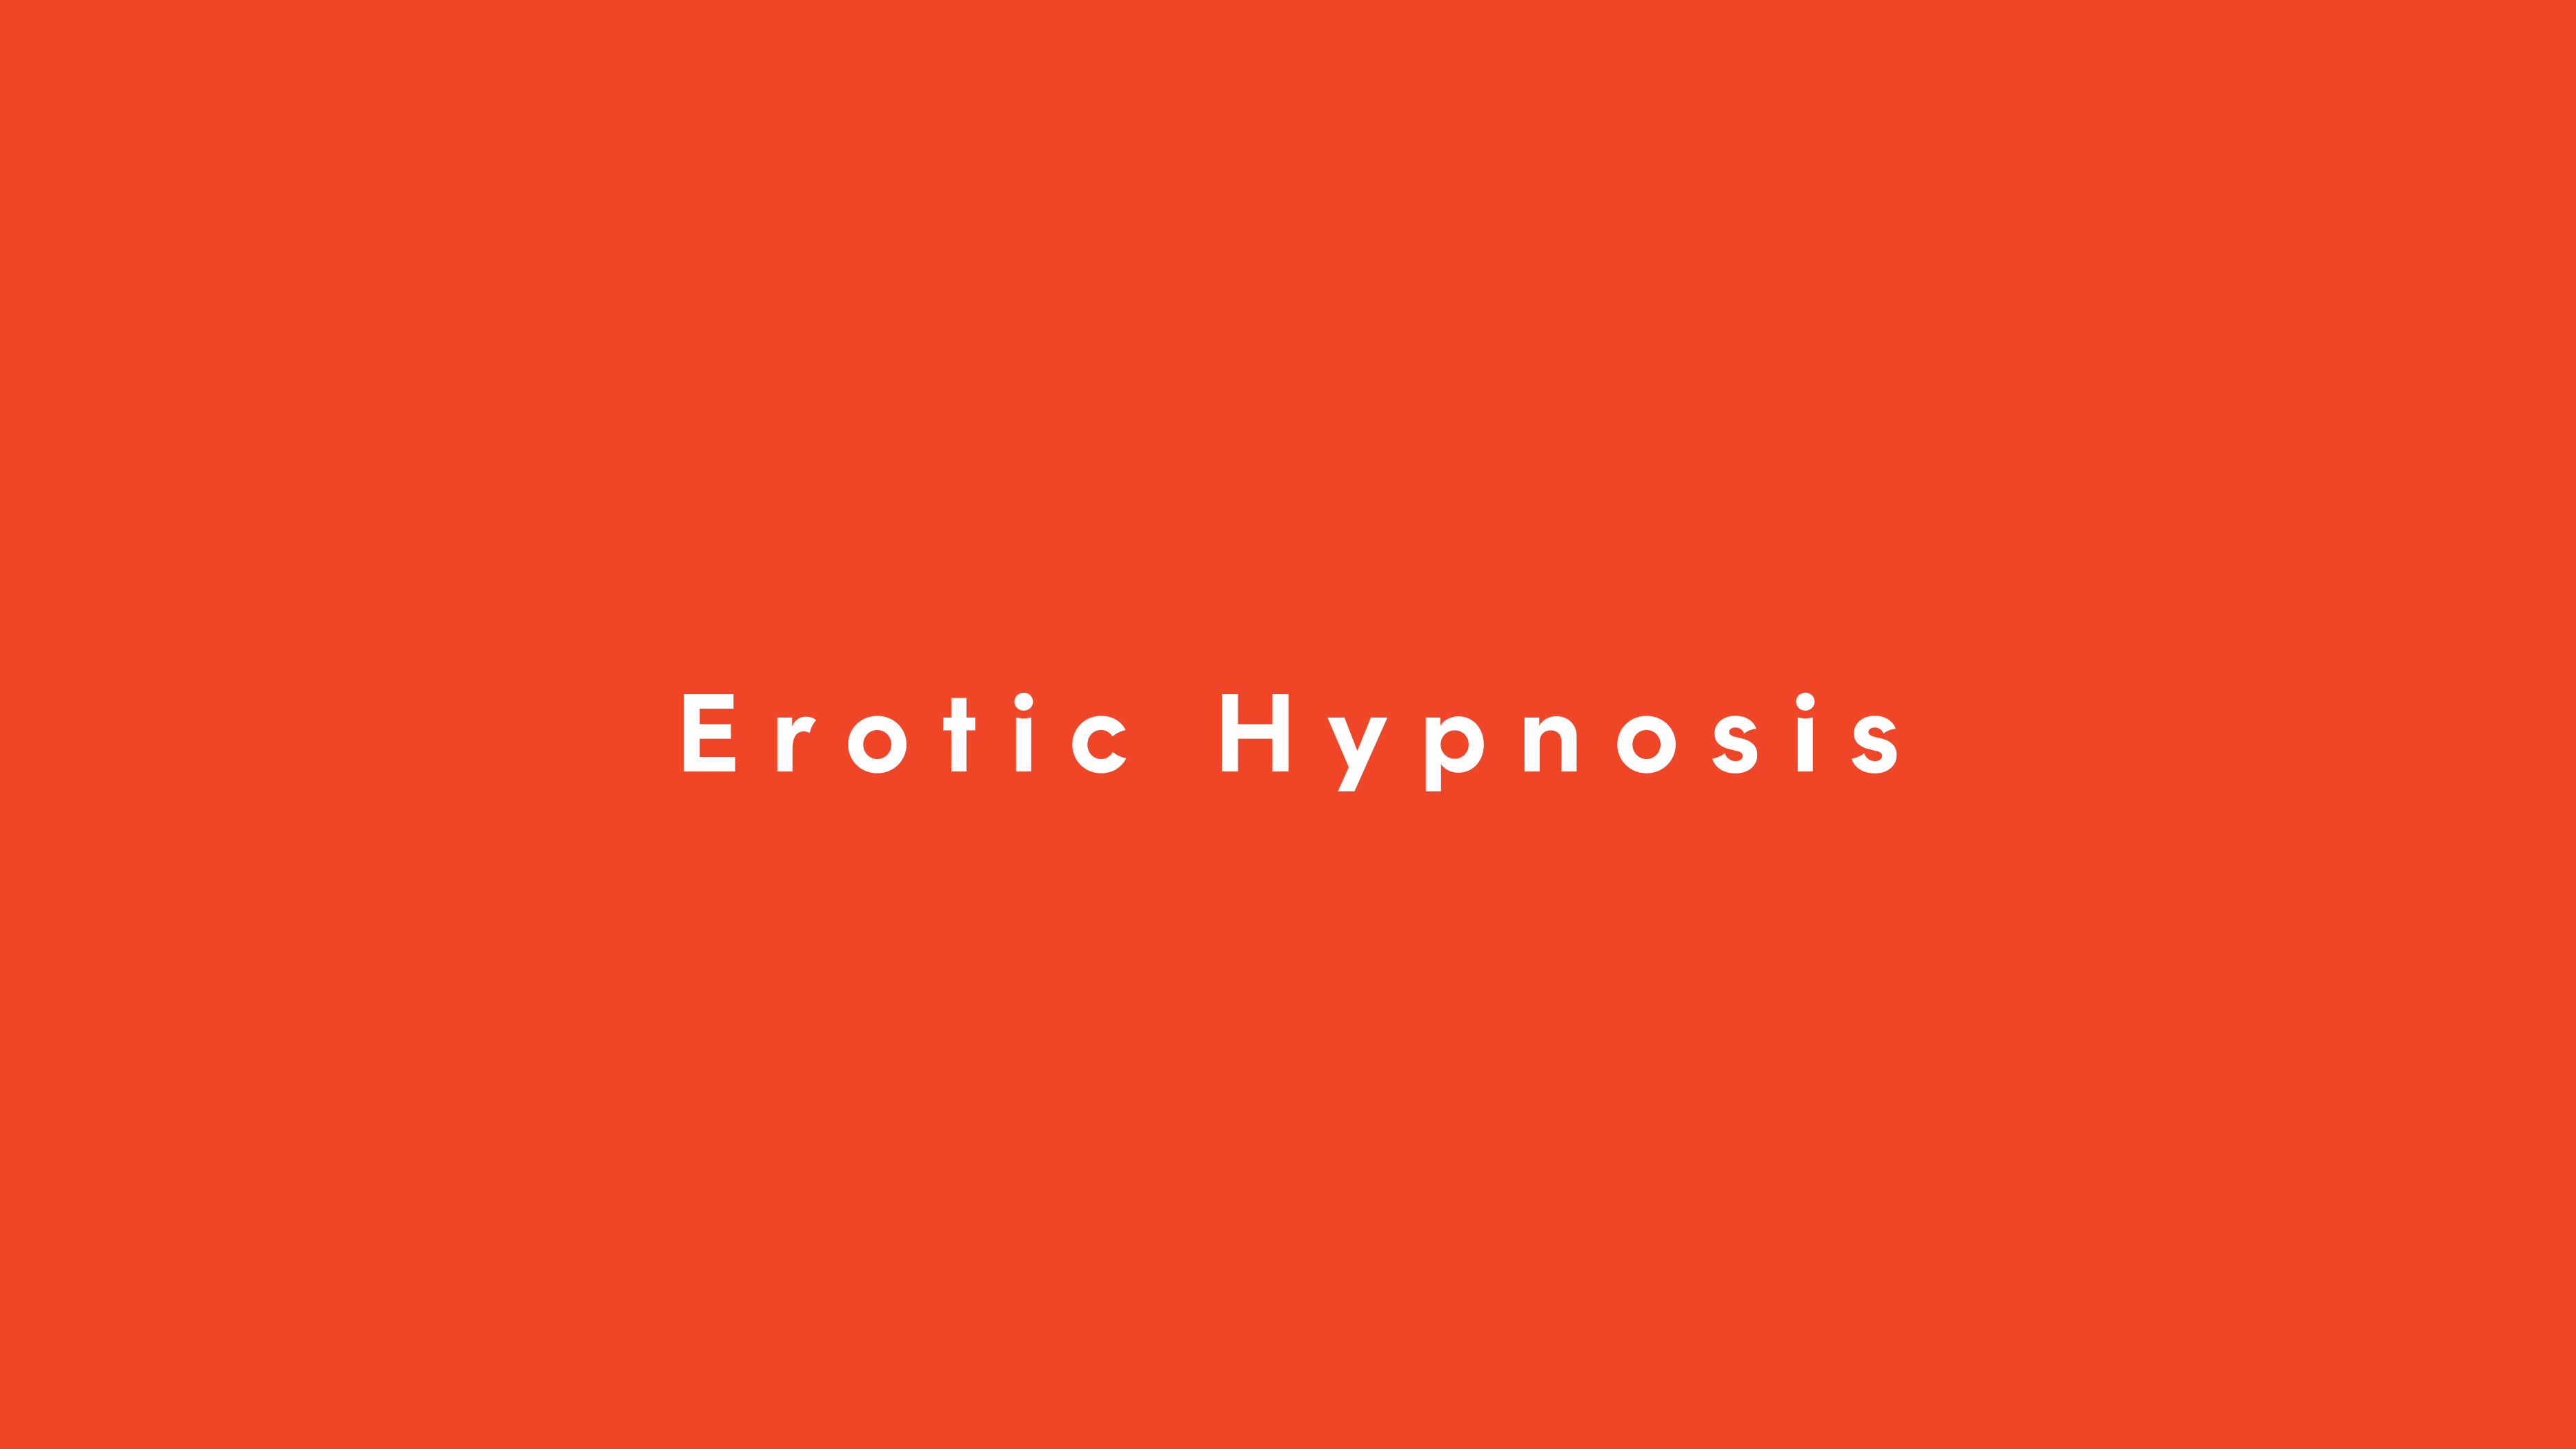 devin hines recommends Best Erotic Hypnosis Video